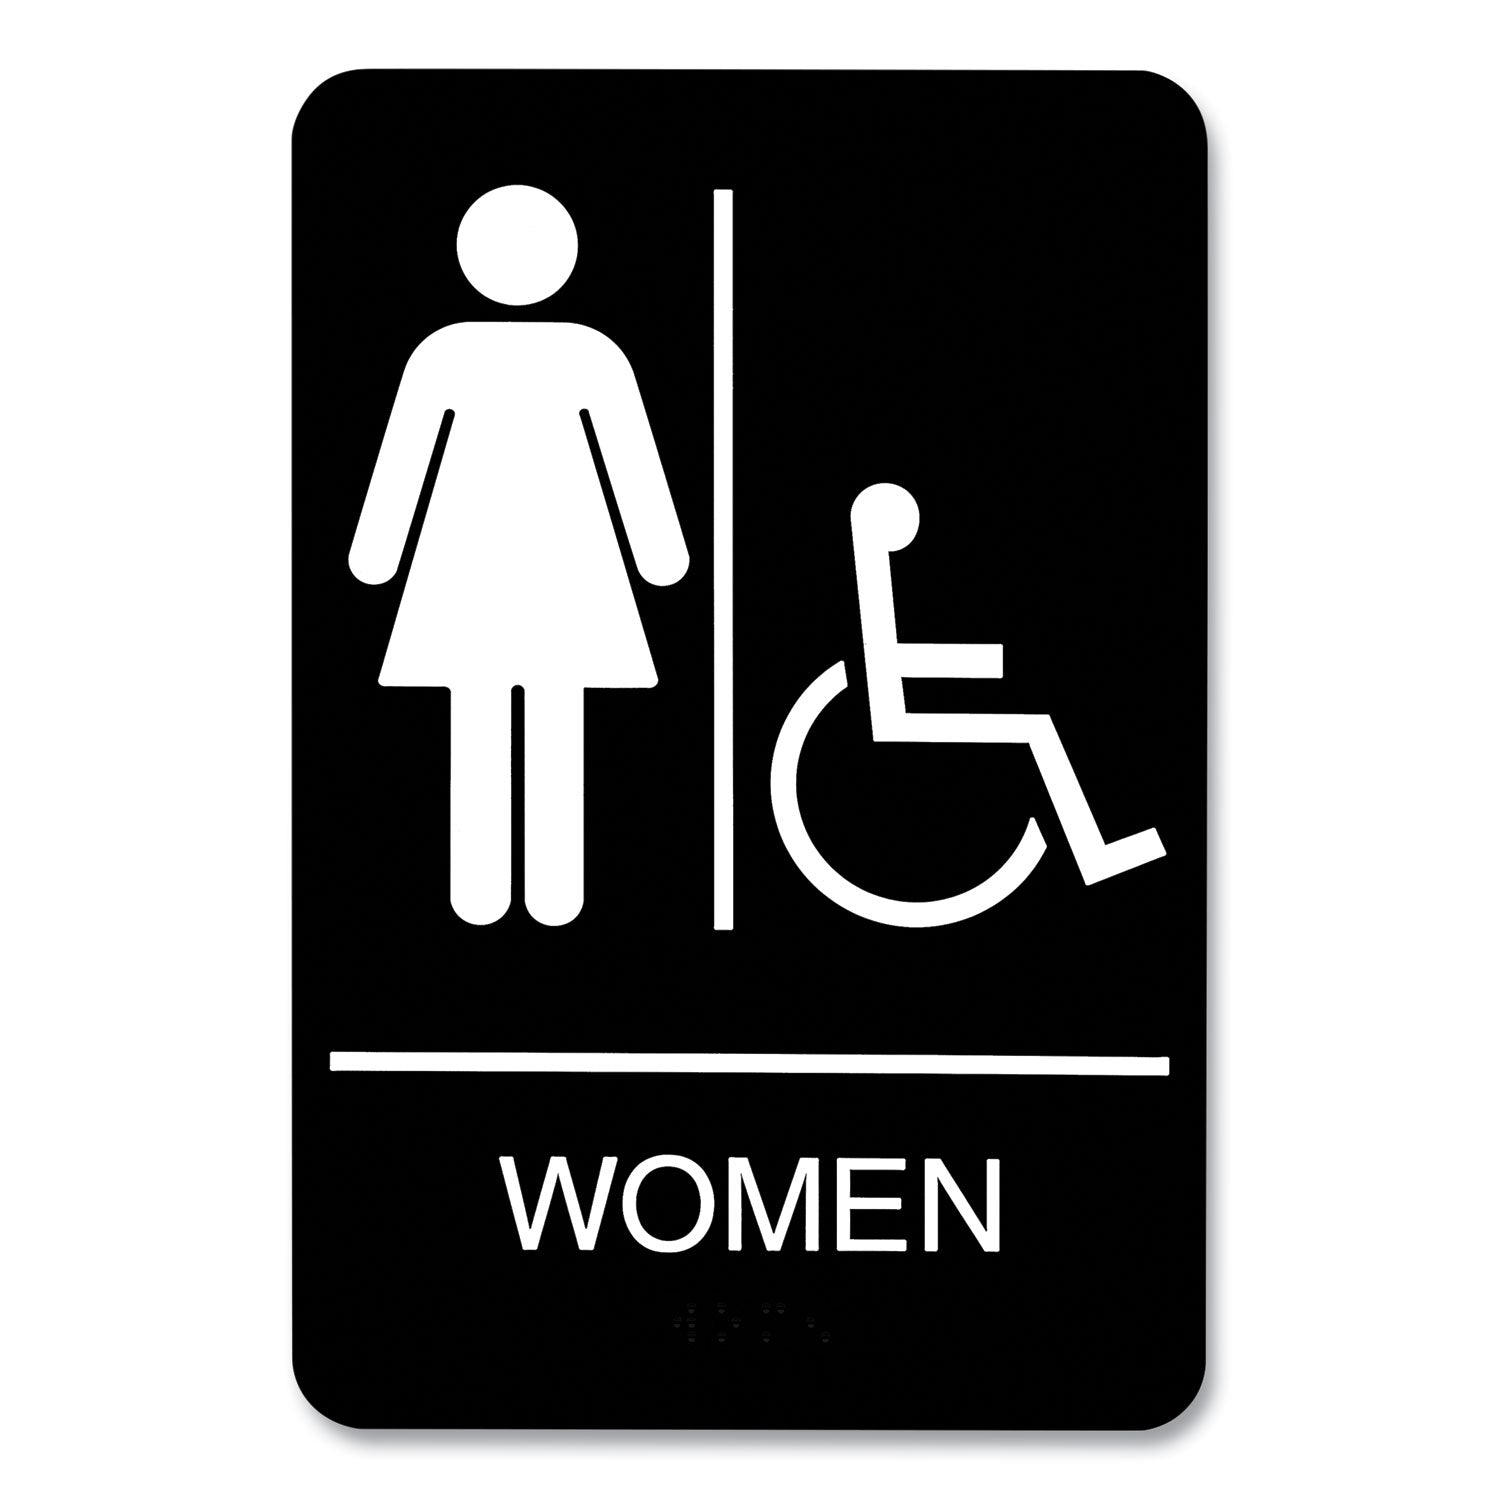 ada-sign-women-wheelchair-accessible-tactile-symbol-plastic-6-x-9-black-white_uss9005 - 1